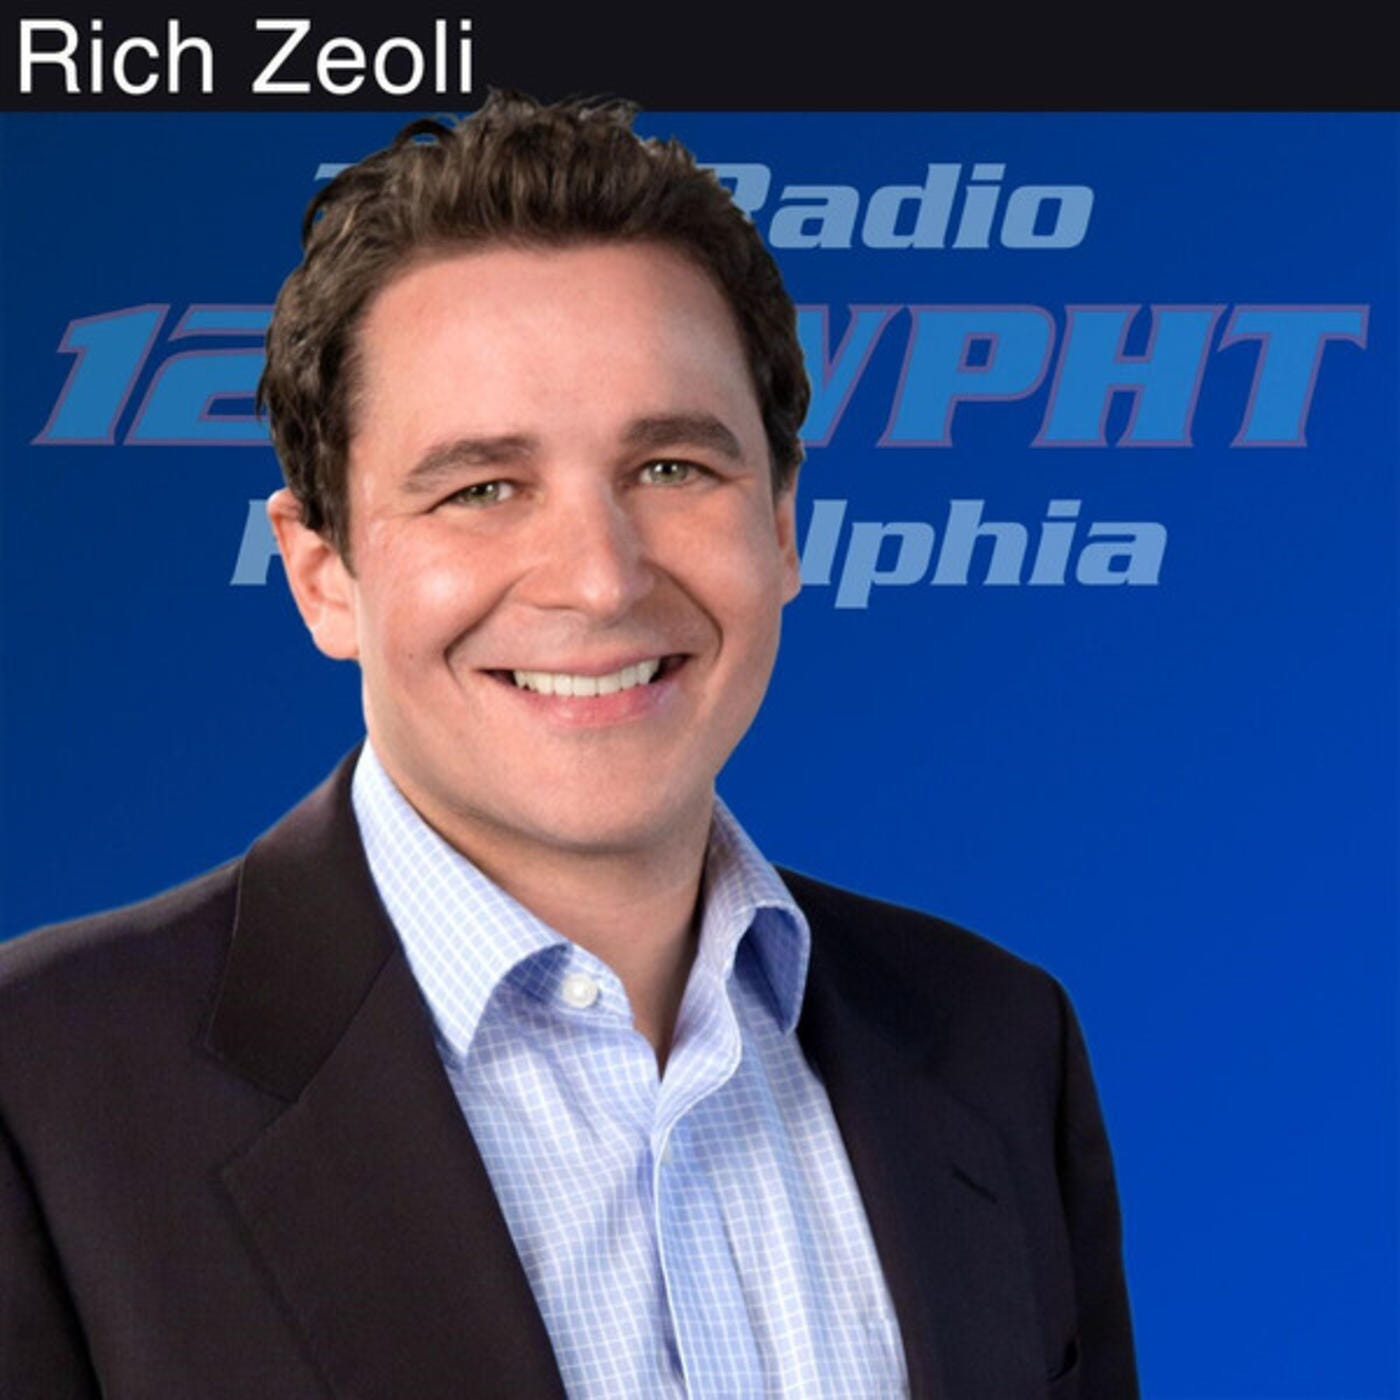 Donald Trump Returns to The Rich Zeoli Show!